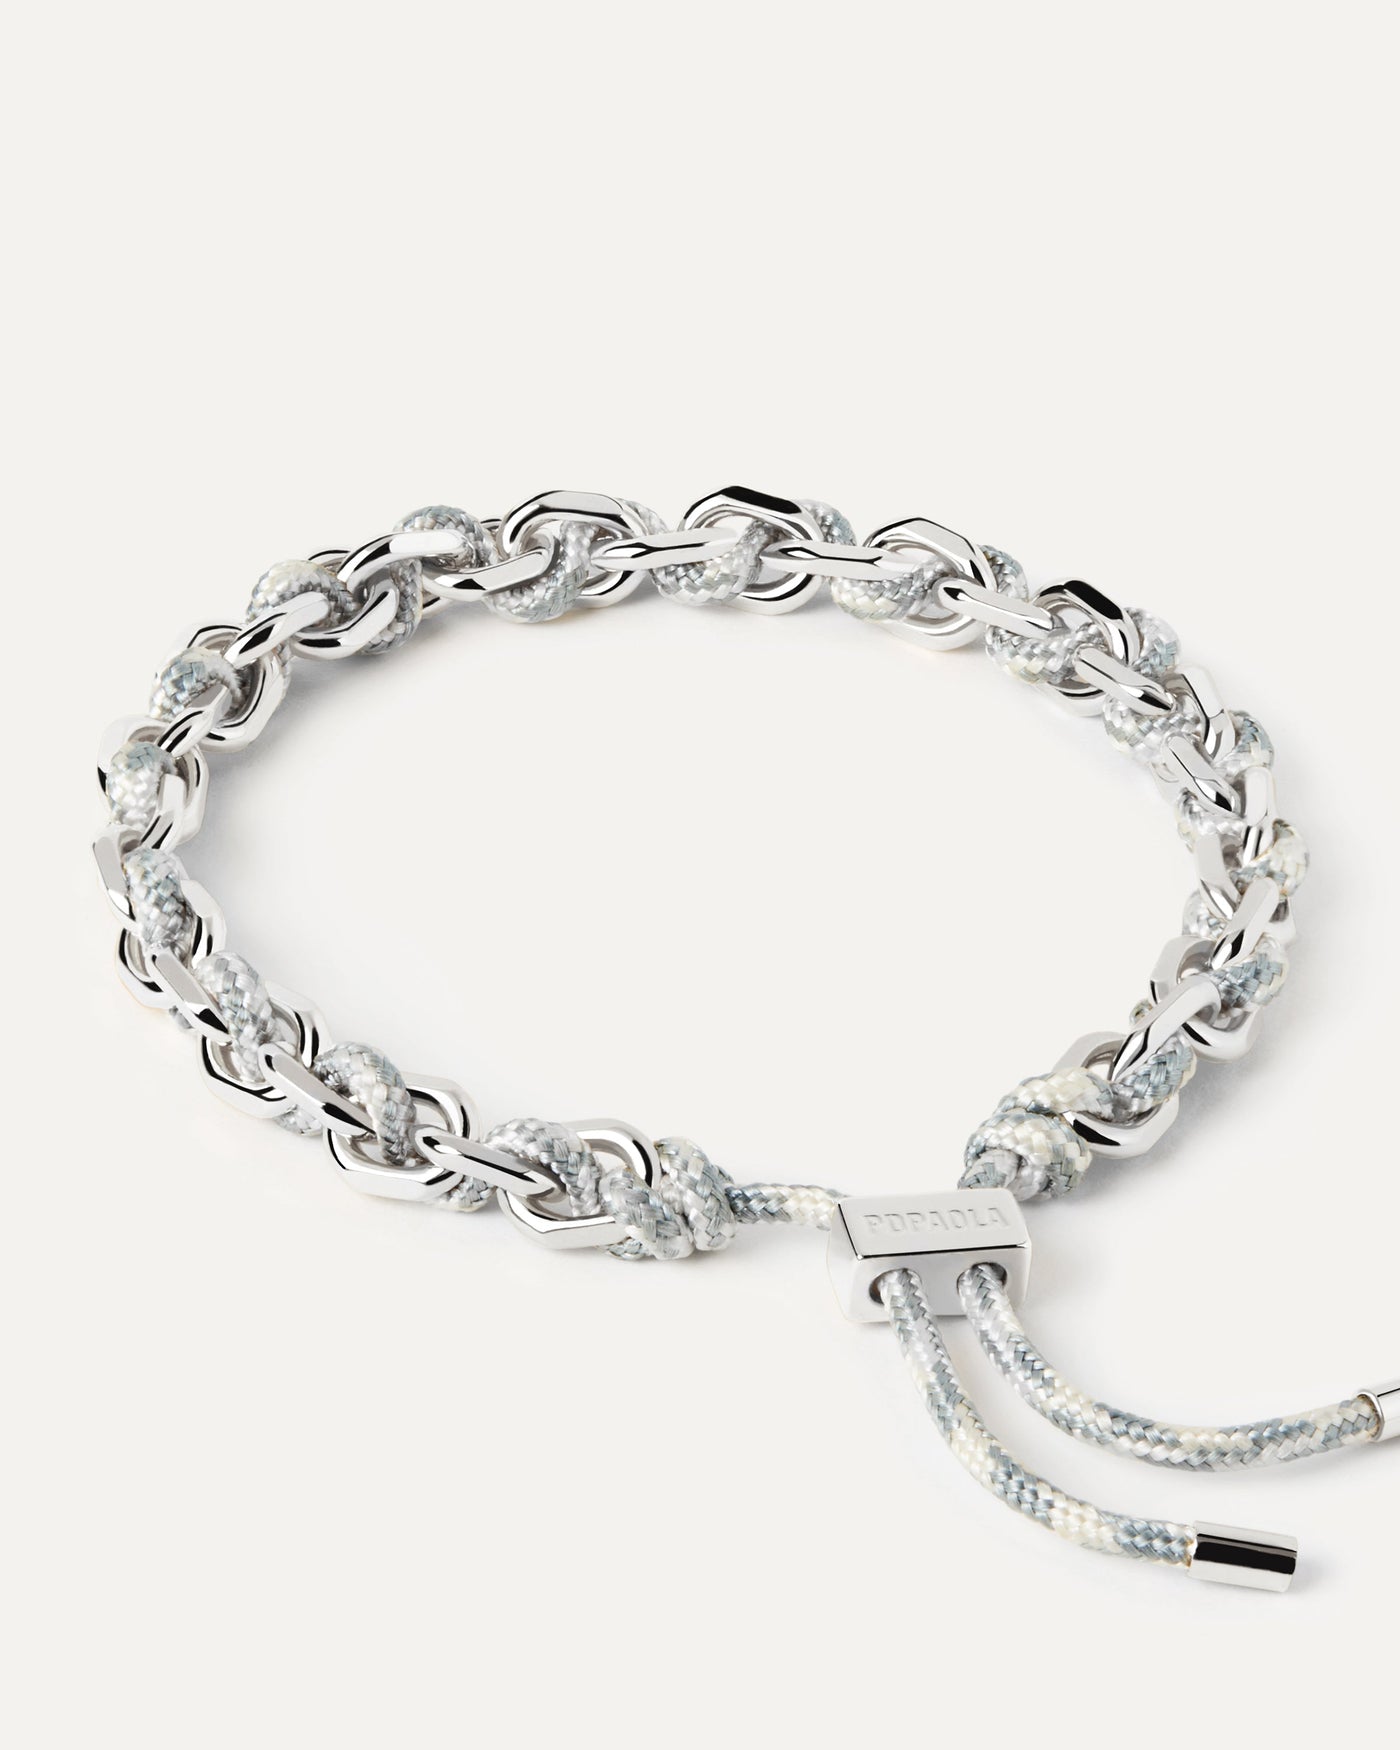 2023 Selection | Sky Rope and Chain Silver Bracelet. Silver chain bracelet with a blue and white rope adjustable sliding clasp. Get the latest arrival from PDPAOLA. Place your order safely and get this Best Seller. Free Shipping.